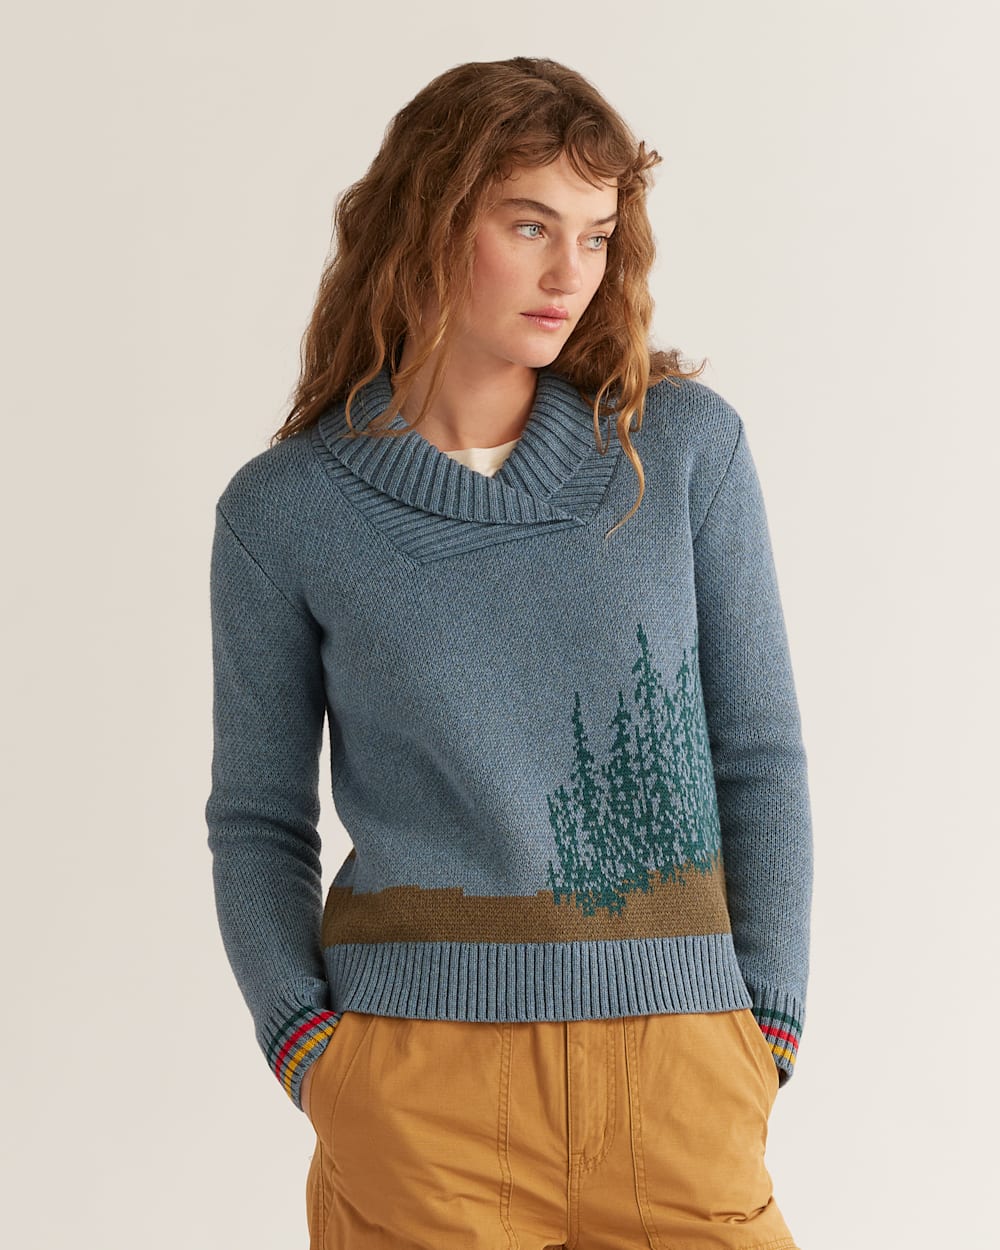 WOMEN'S SILVER CREEK PULLOVER IN SHALE BLUE MIX image number 1